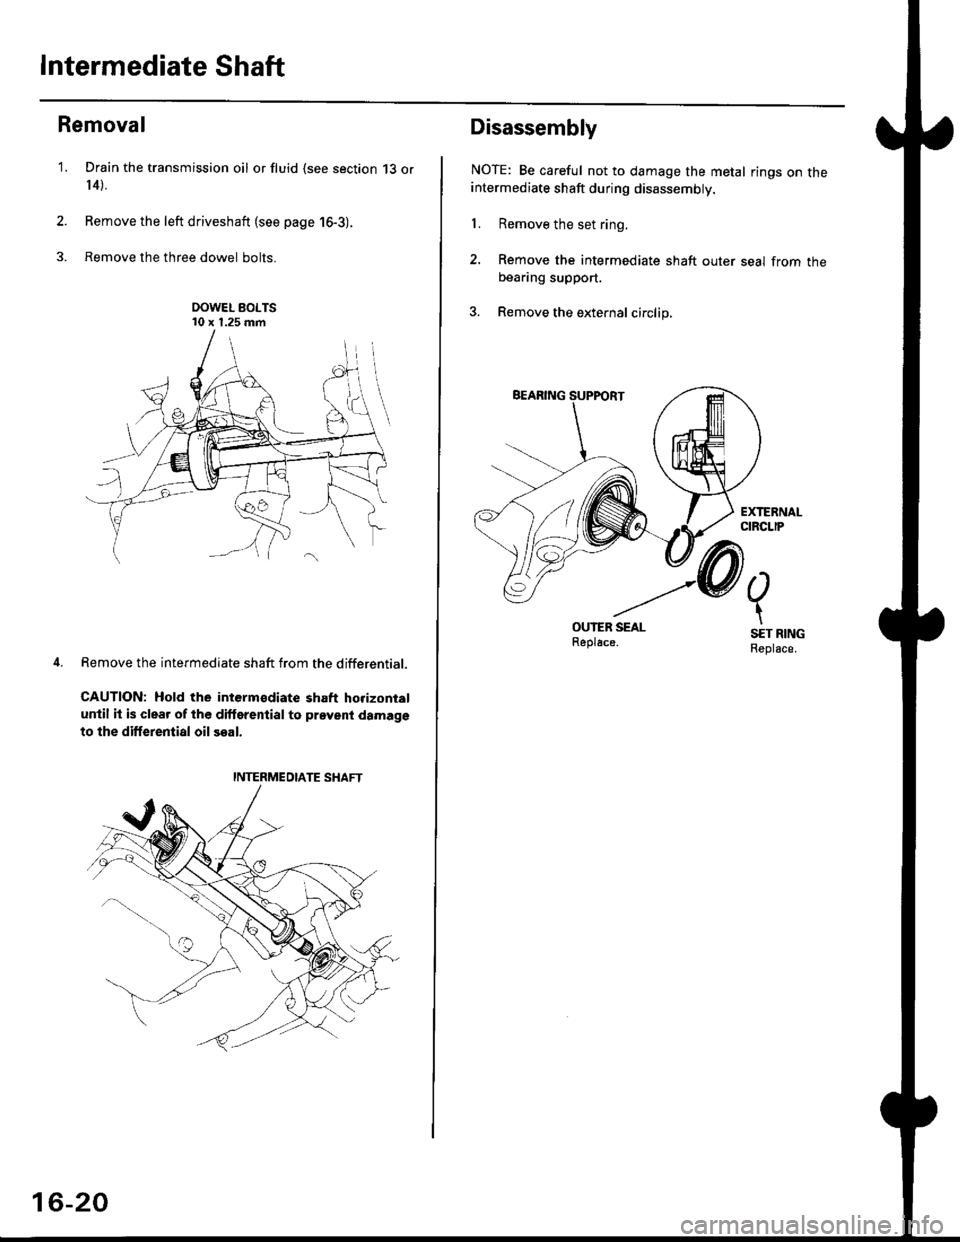 HONDA CIVIC 1996 6.G Workshop Manual Intermediate Shaft
Removal
Drain the transmission oil or fluid {see section 13 or
r 4).
Remove the left driveshaft (see page 16-3).
Remove the three dowel bolts.
OOWEL BOLTS10 x 1.25 mm
Remove the in